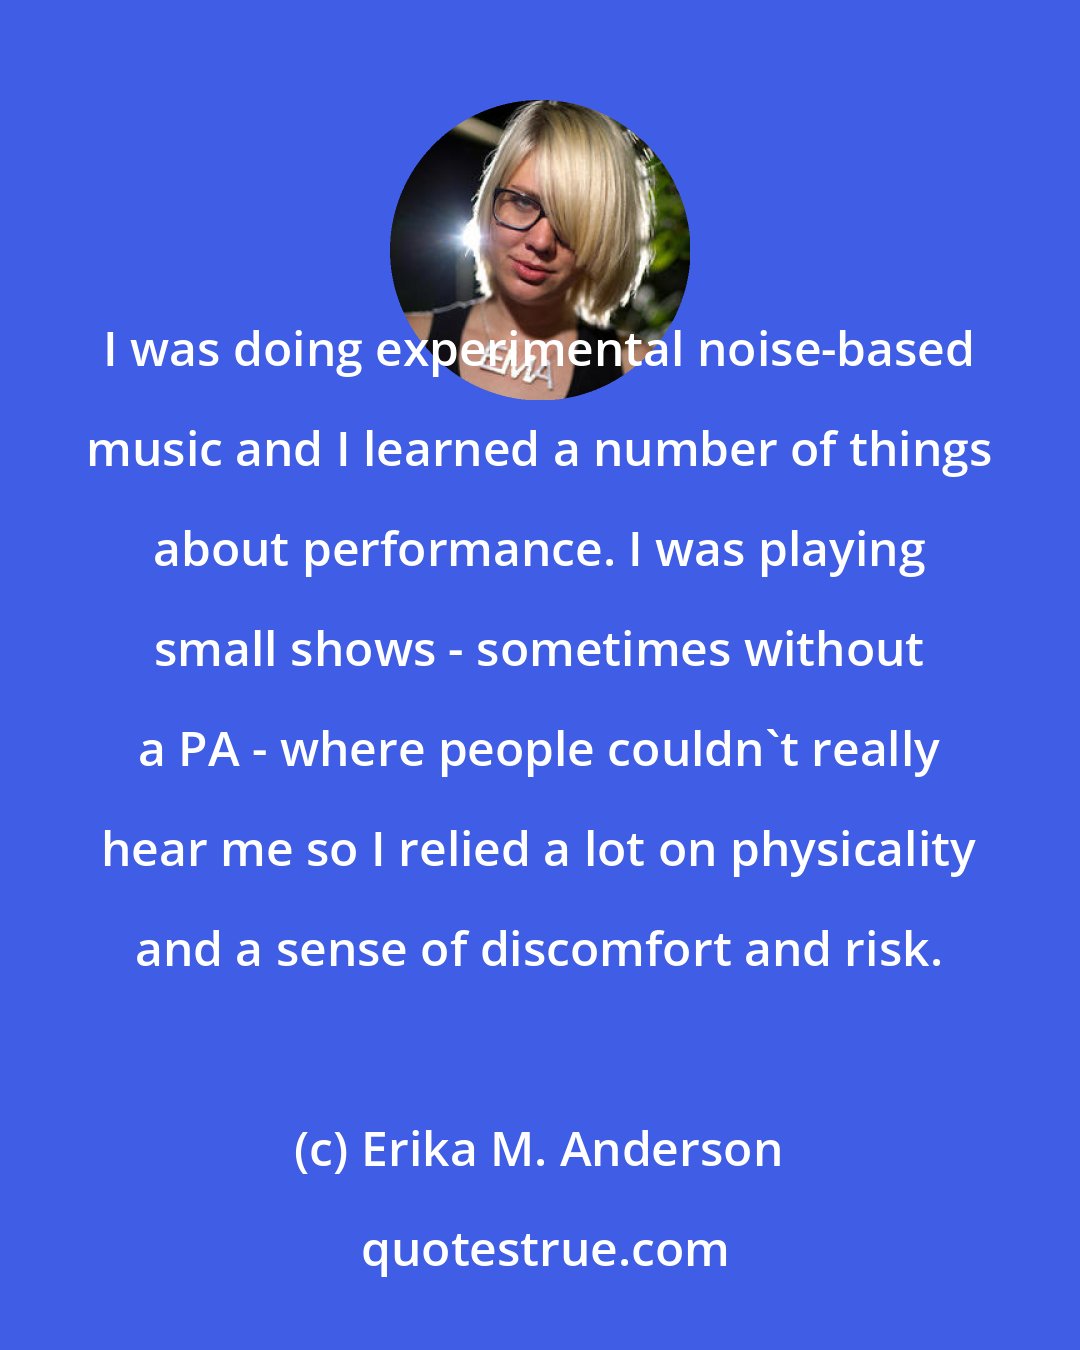 Erika M. Anderson: I was doing experimental noise-based music and I learned a number of things about performance. I was playing small shows - sometimes without a PA - where people couldn't really hear me so I relied a lot on physicality and a sense of discomfort and risk.